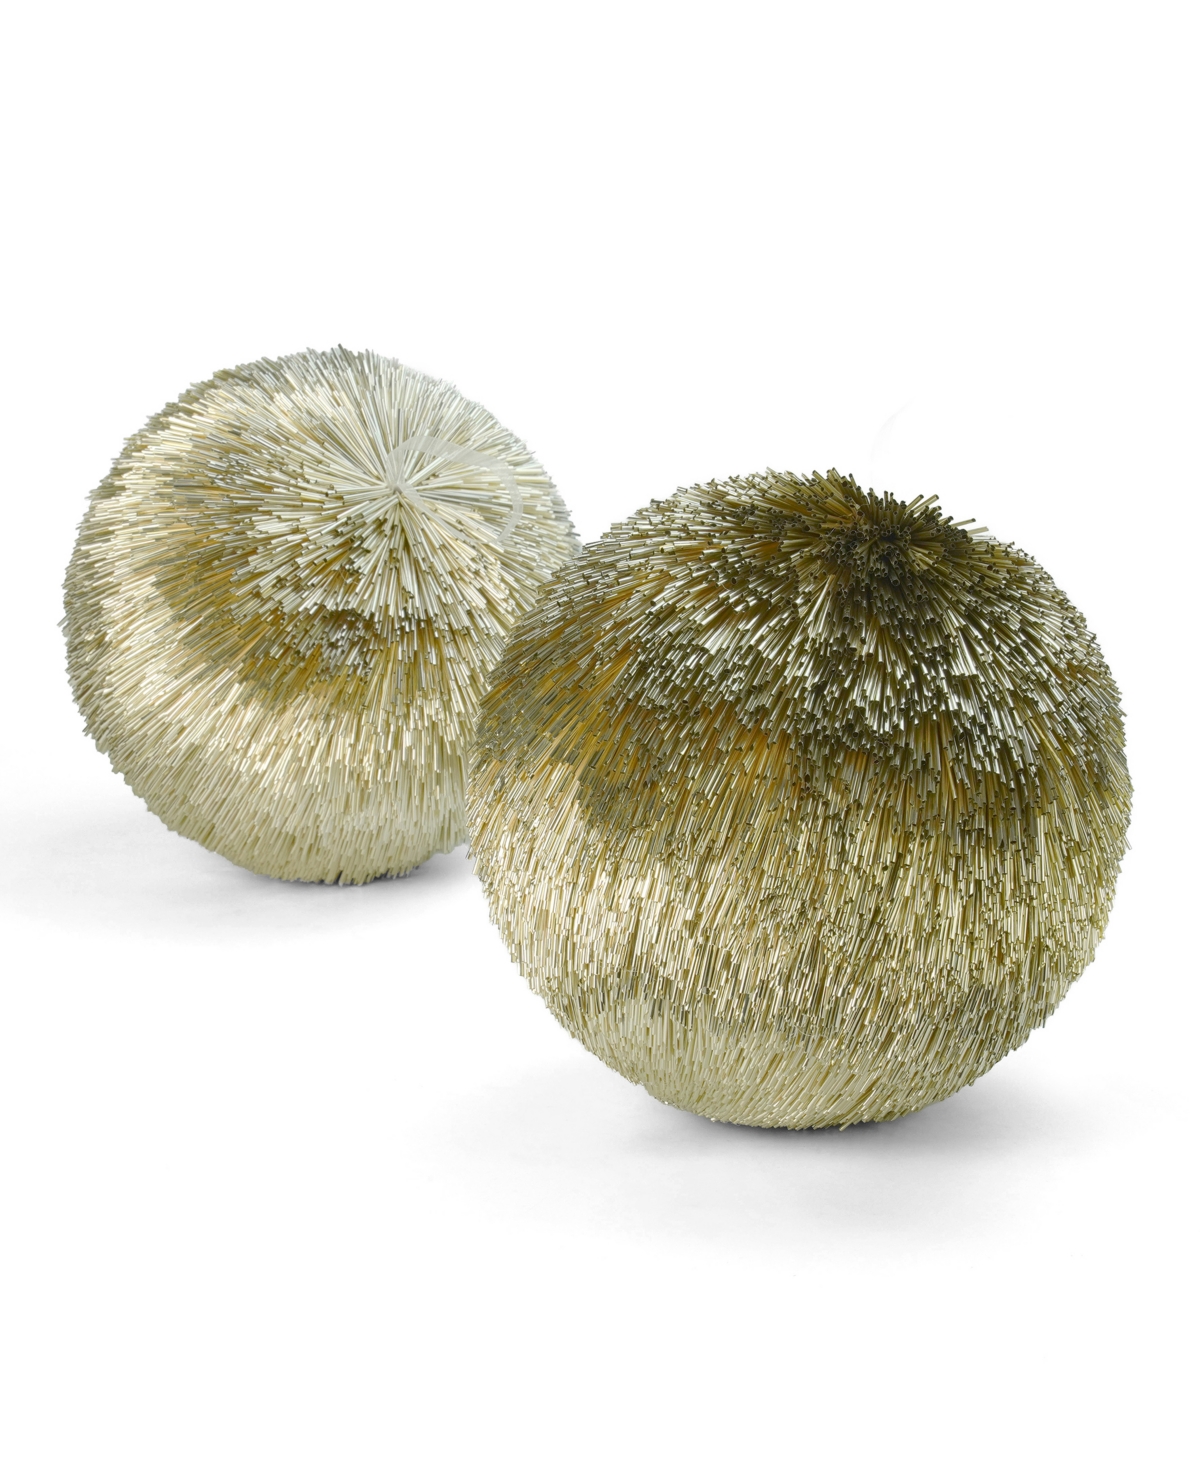 Pipa 7.8" Ornaments, Set of 2 - Champagne